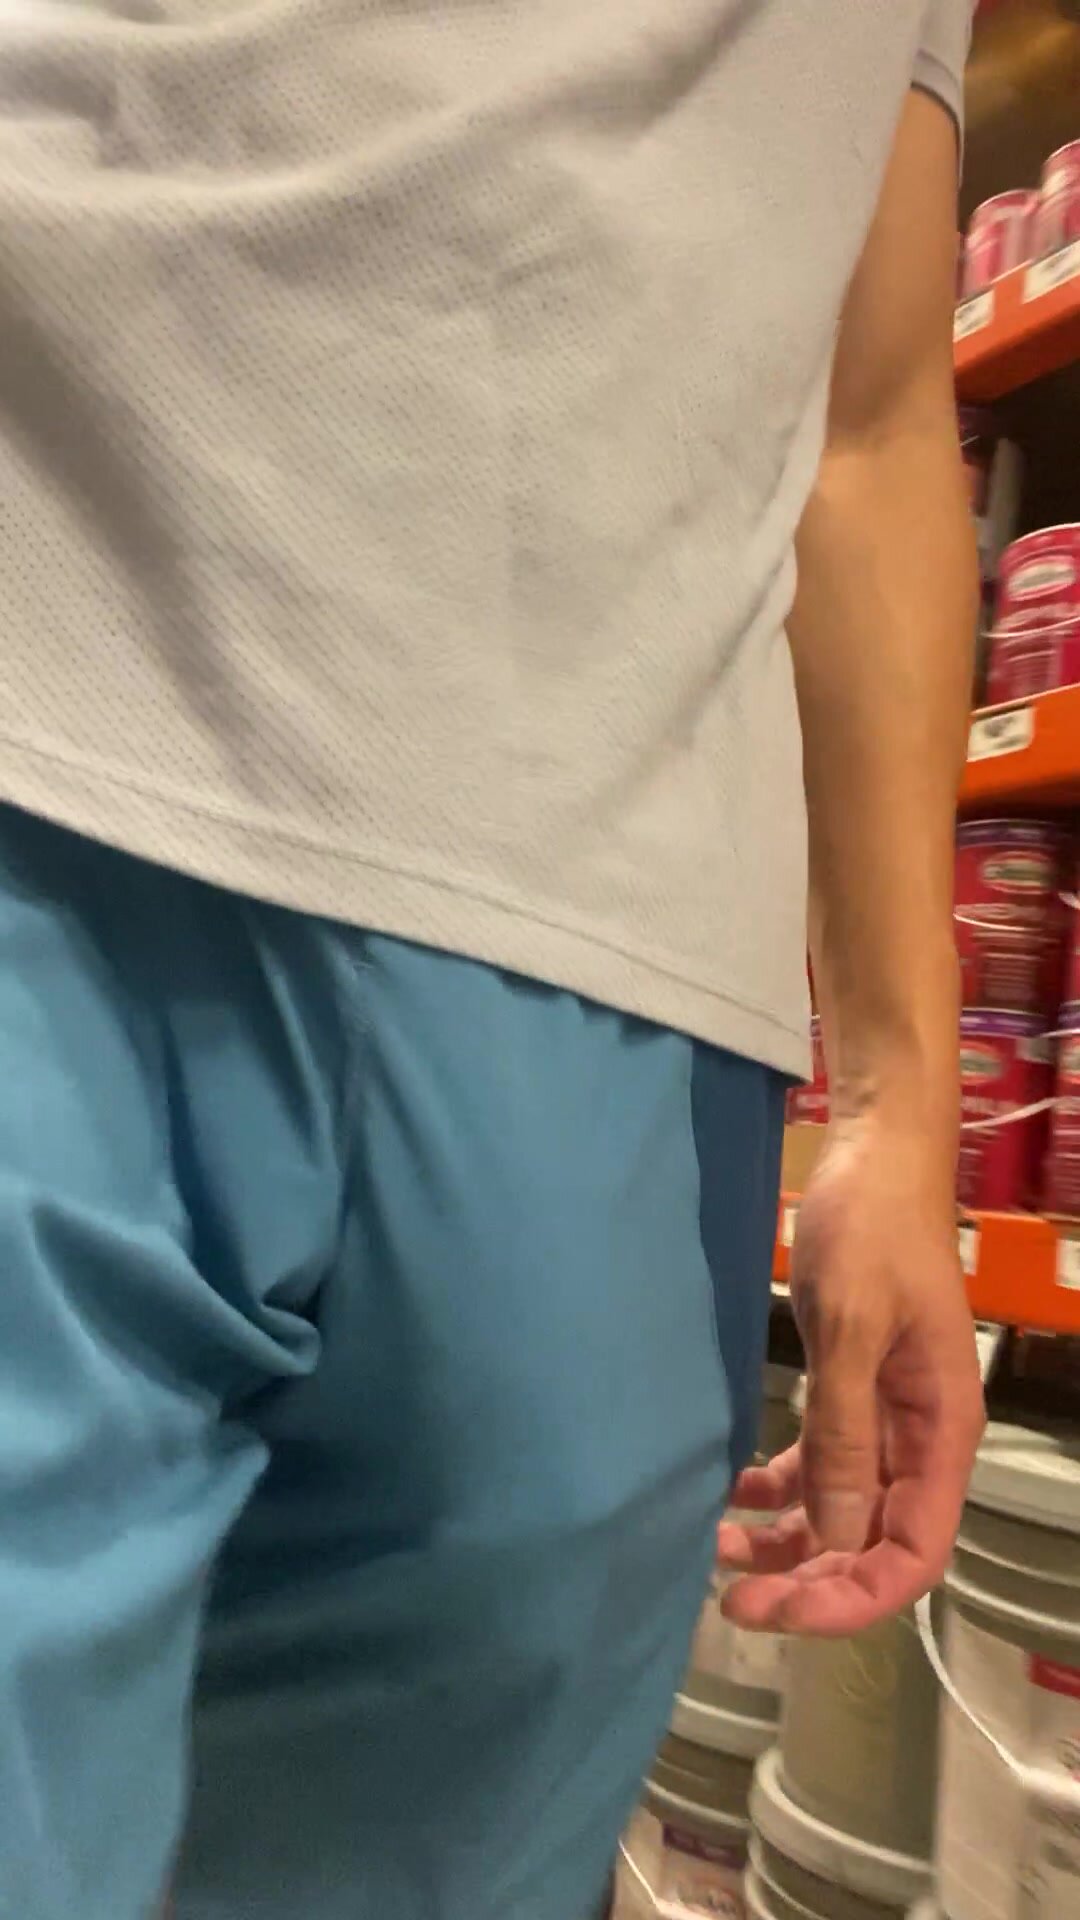 Big bulge in the store